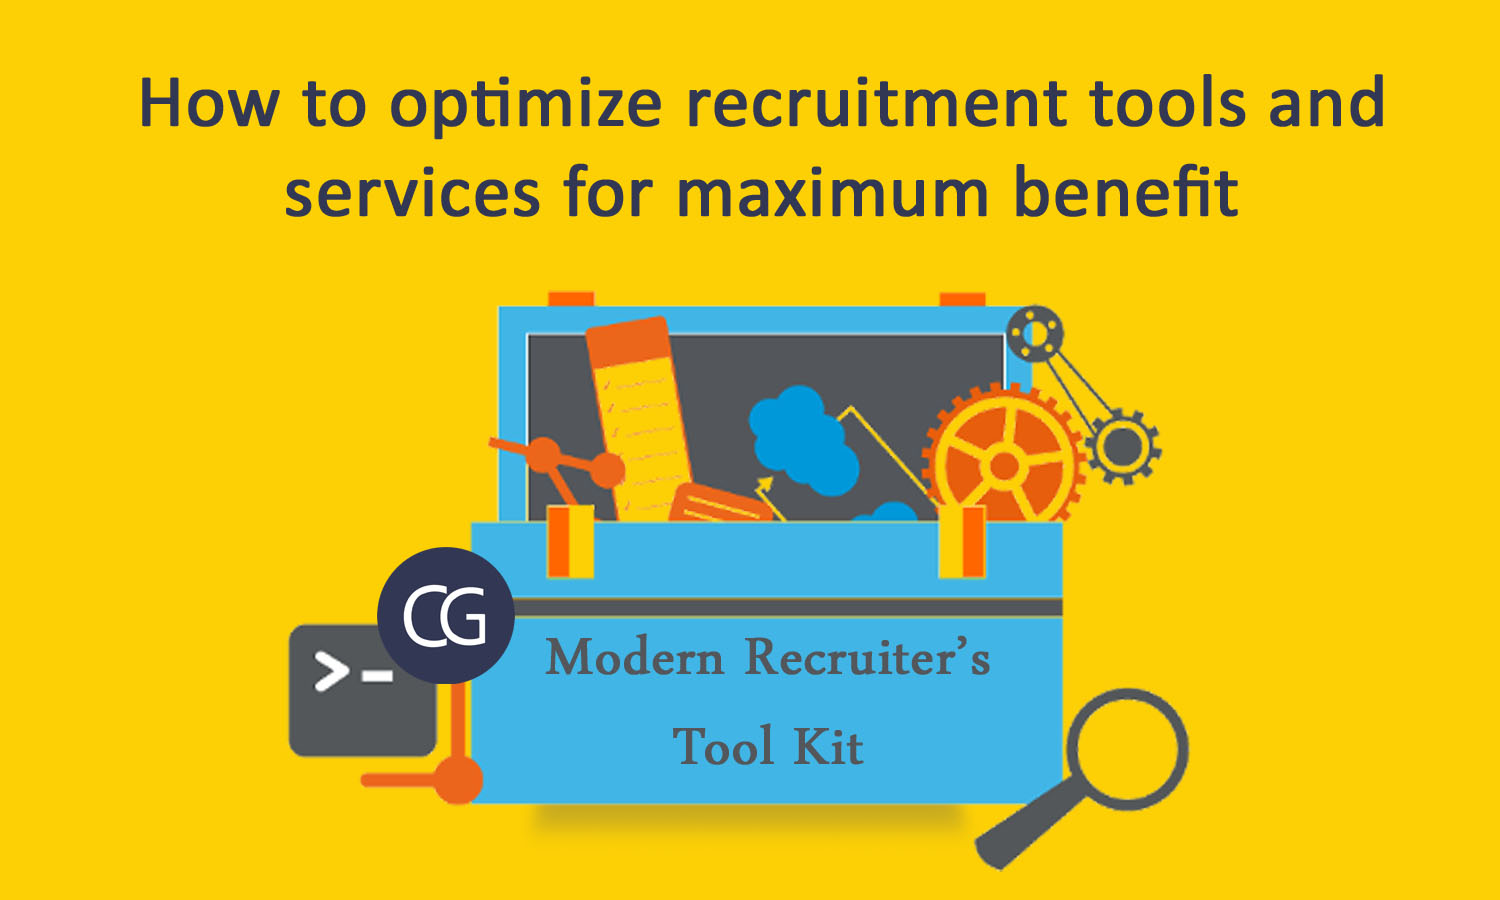 How to optimize recruitment tools and services for maximum benefit